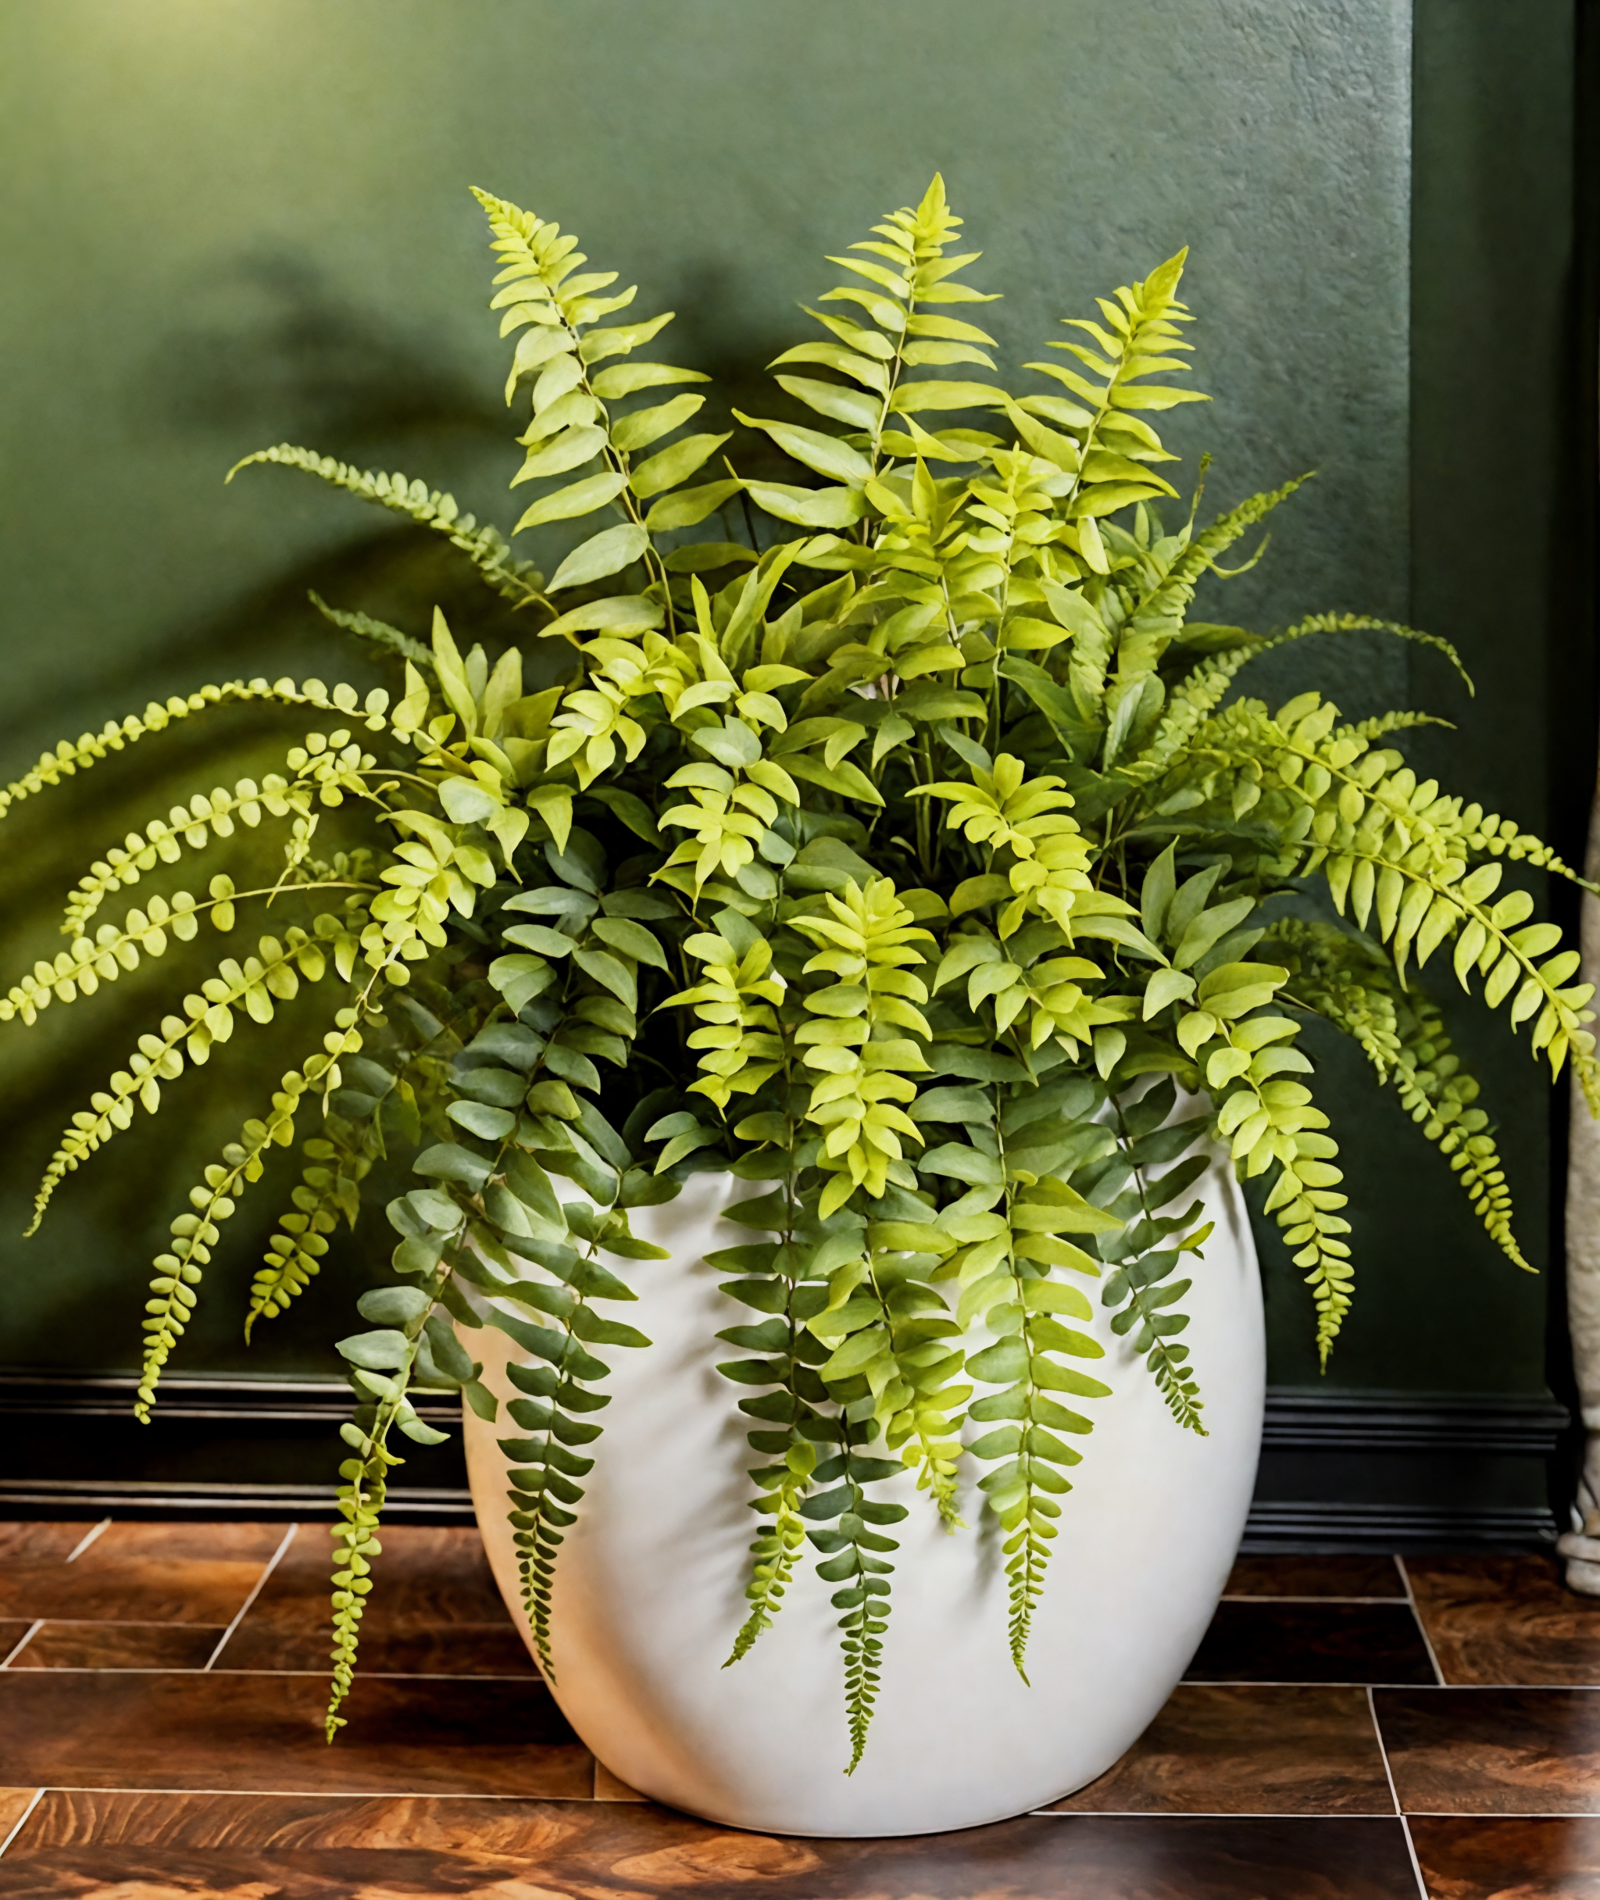 A lush Boston fern (Nephrolepis exaltata) in a white bowl on a wooden floor, with clear, neutral lighting.